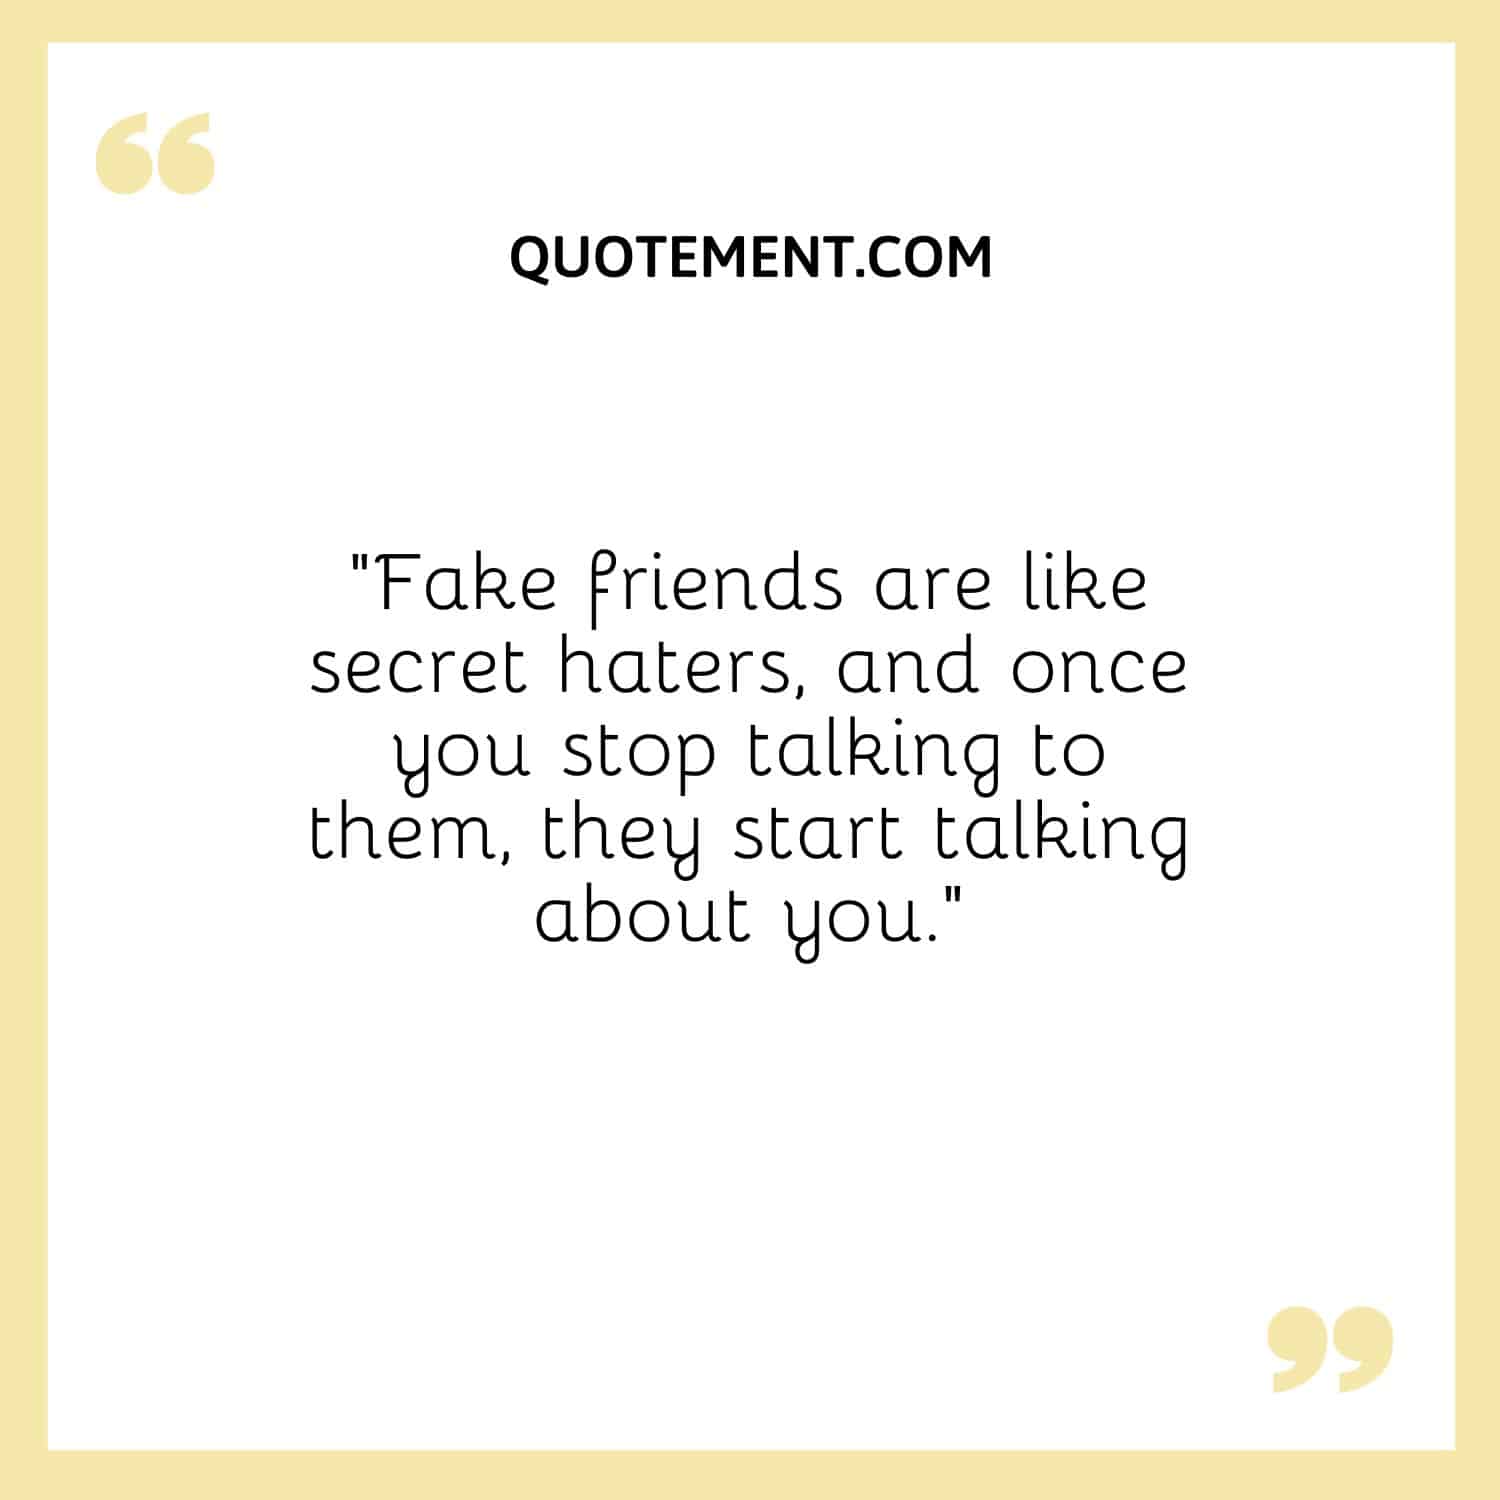 “Fake friends are like secret haters, and once you stop talking to them, they start talking about you.”